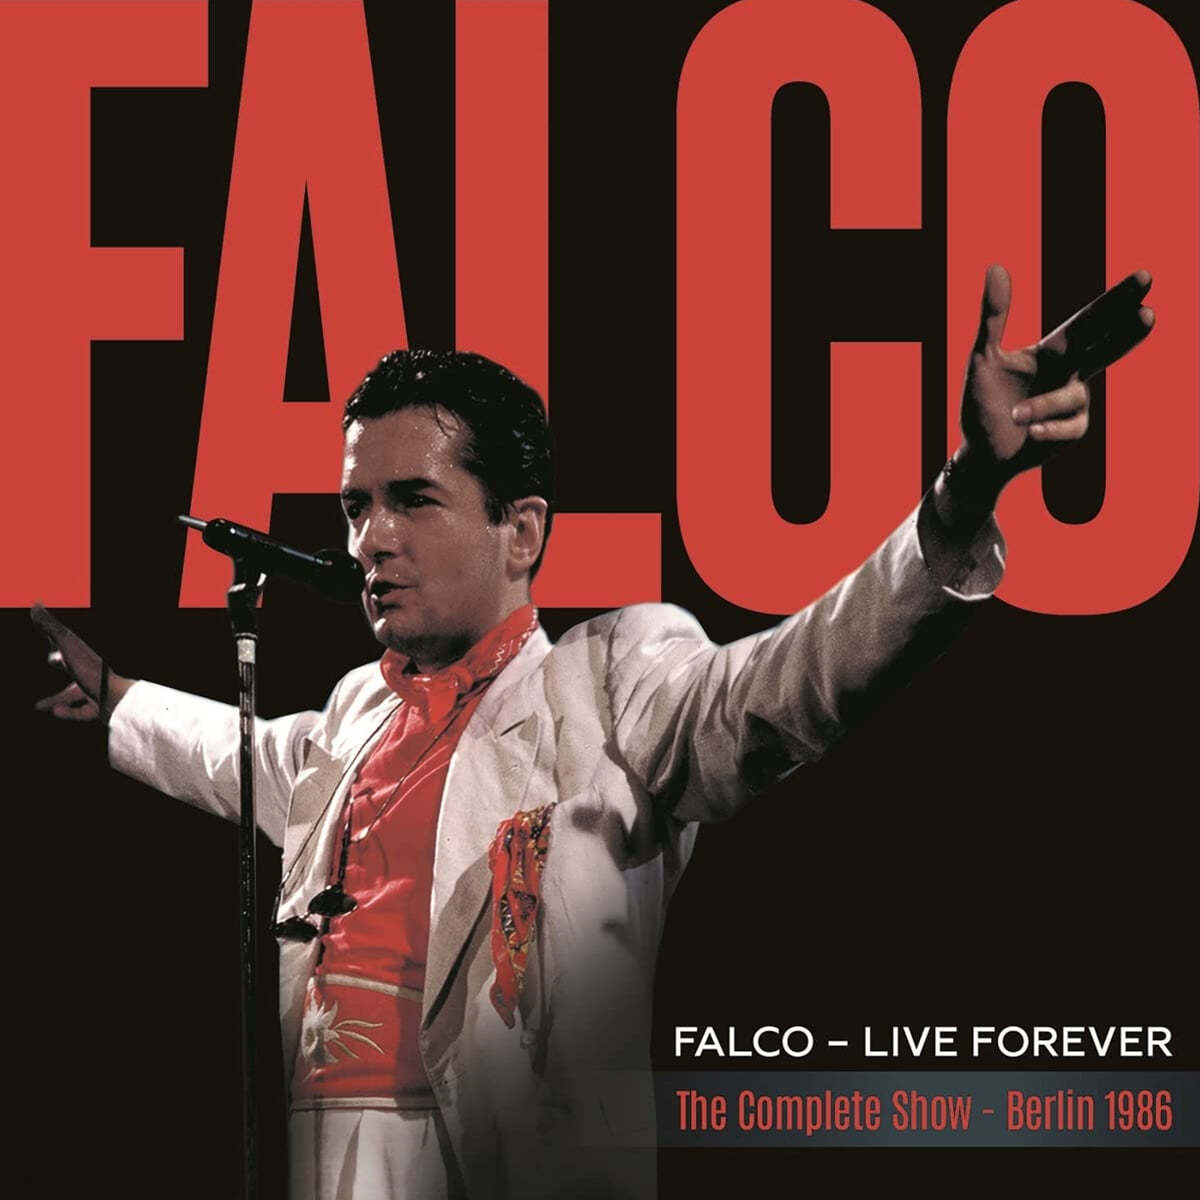 Falco (팔코) - Live Forever (The Complete Show - Berlin 1986)